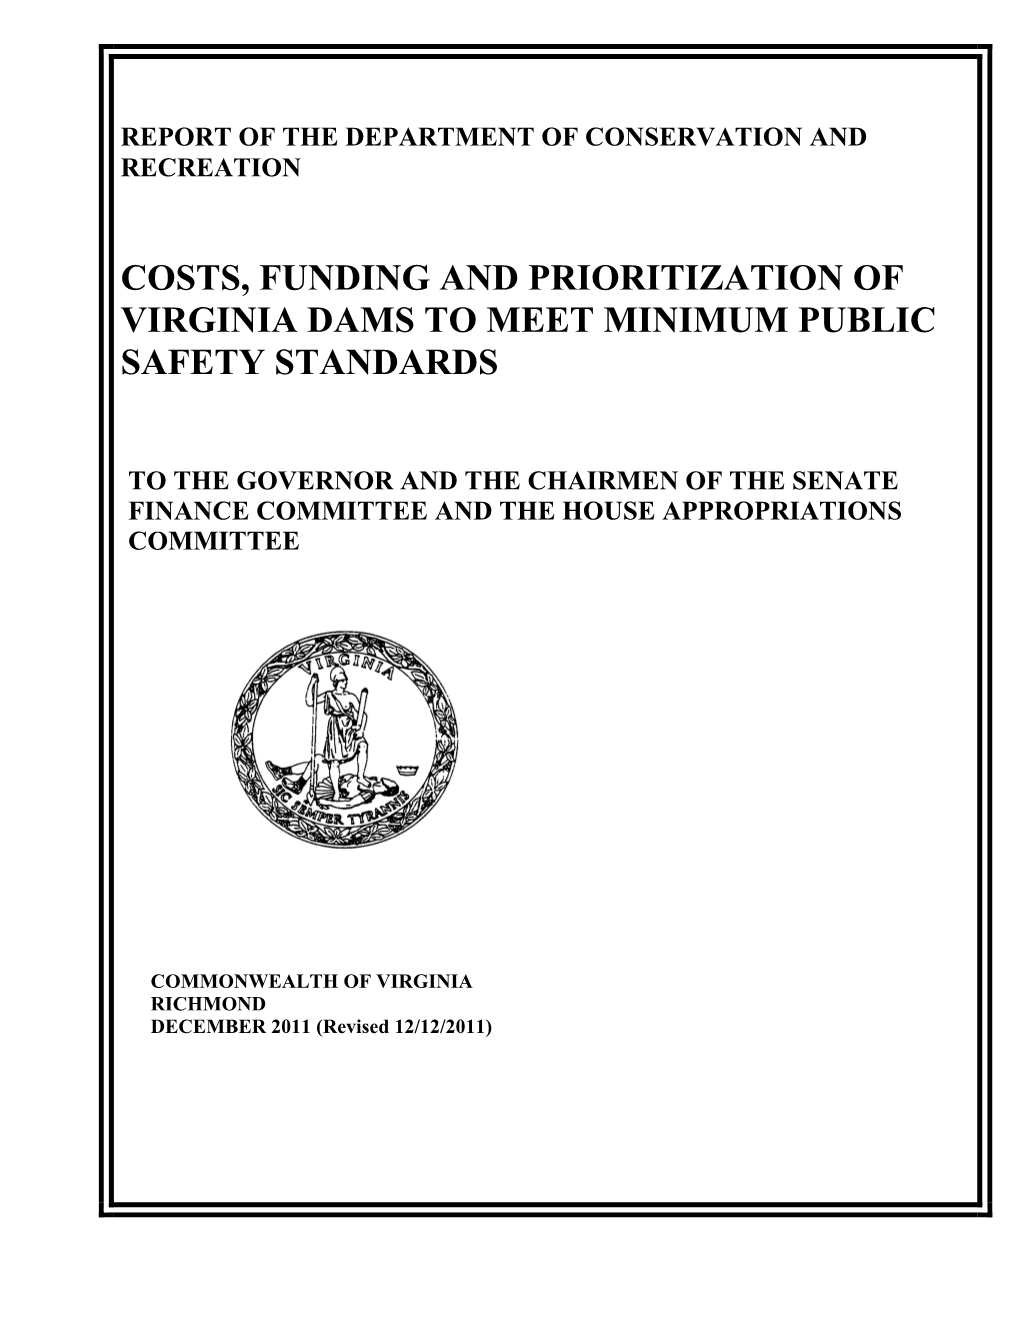 Costs, Funding and Prioritization of Virginia Dams to Meet Minimum Public Safety Standards